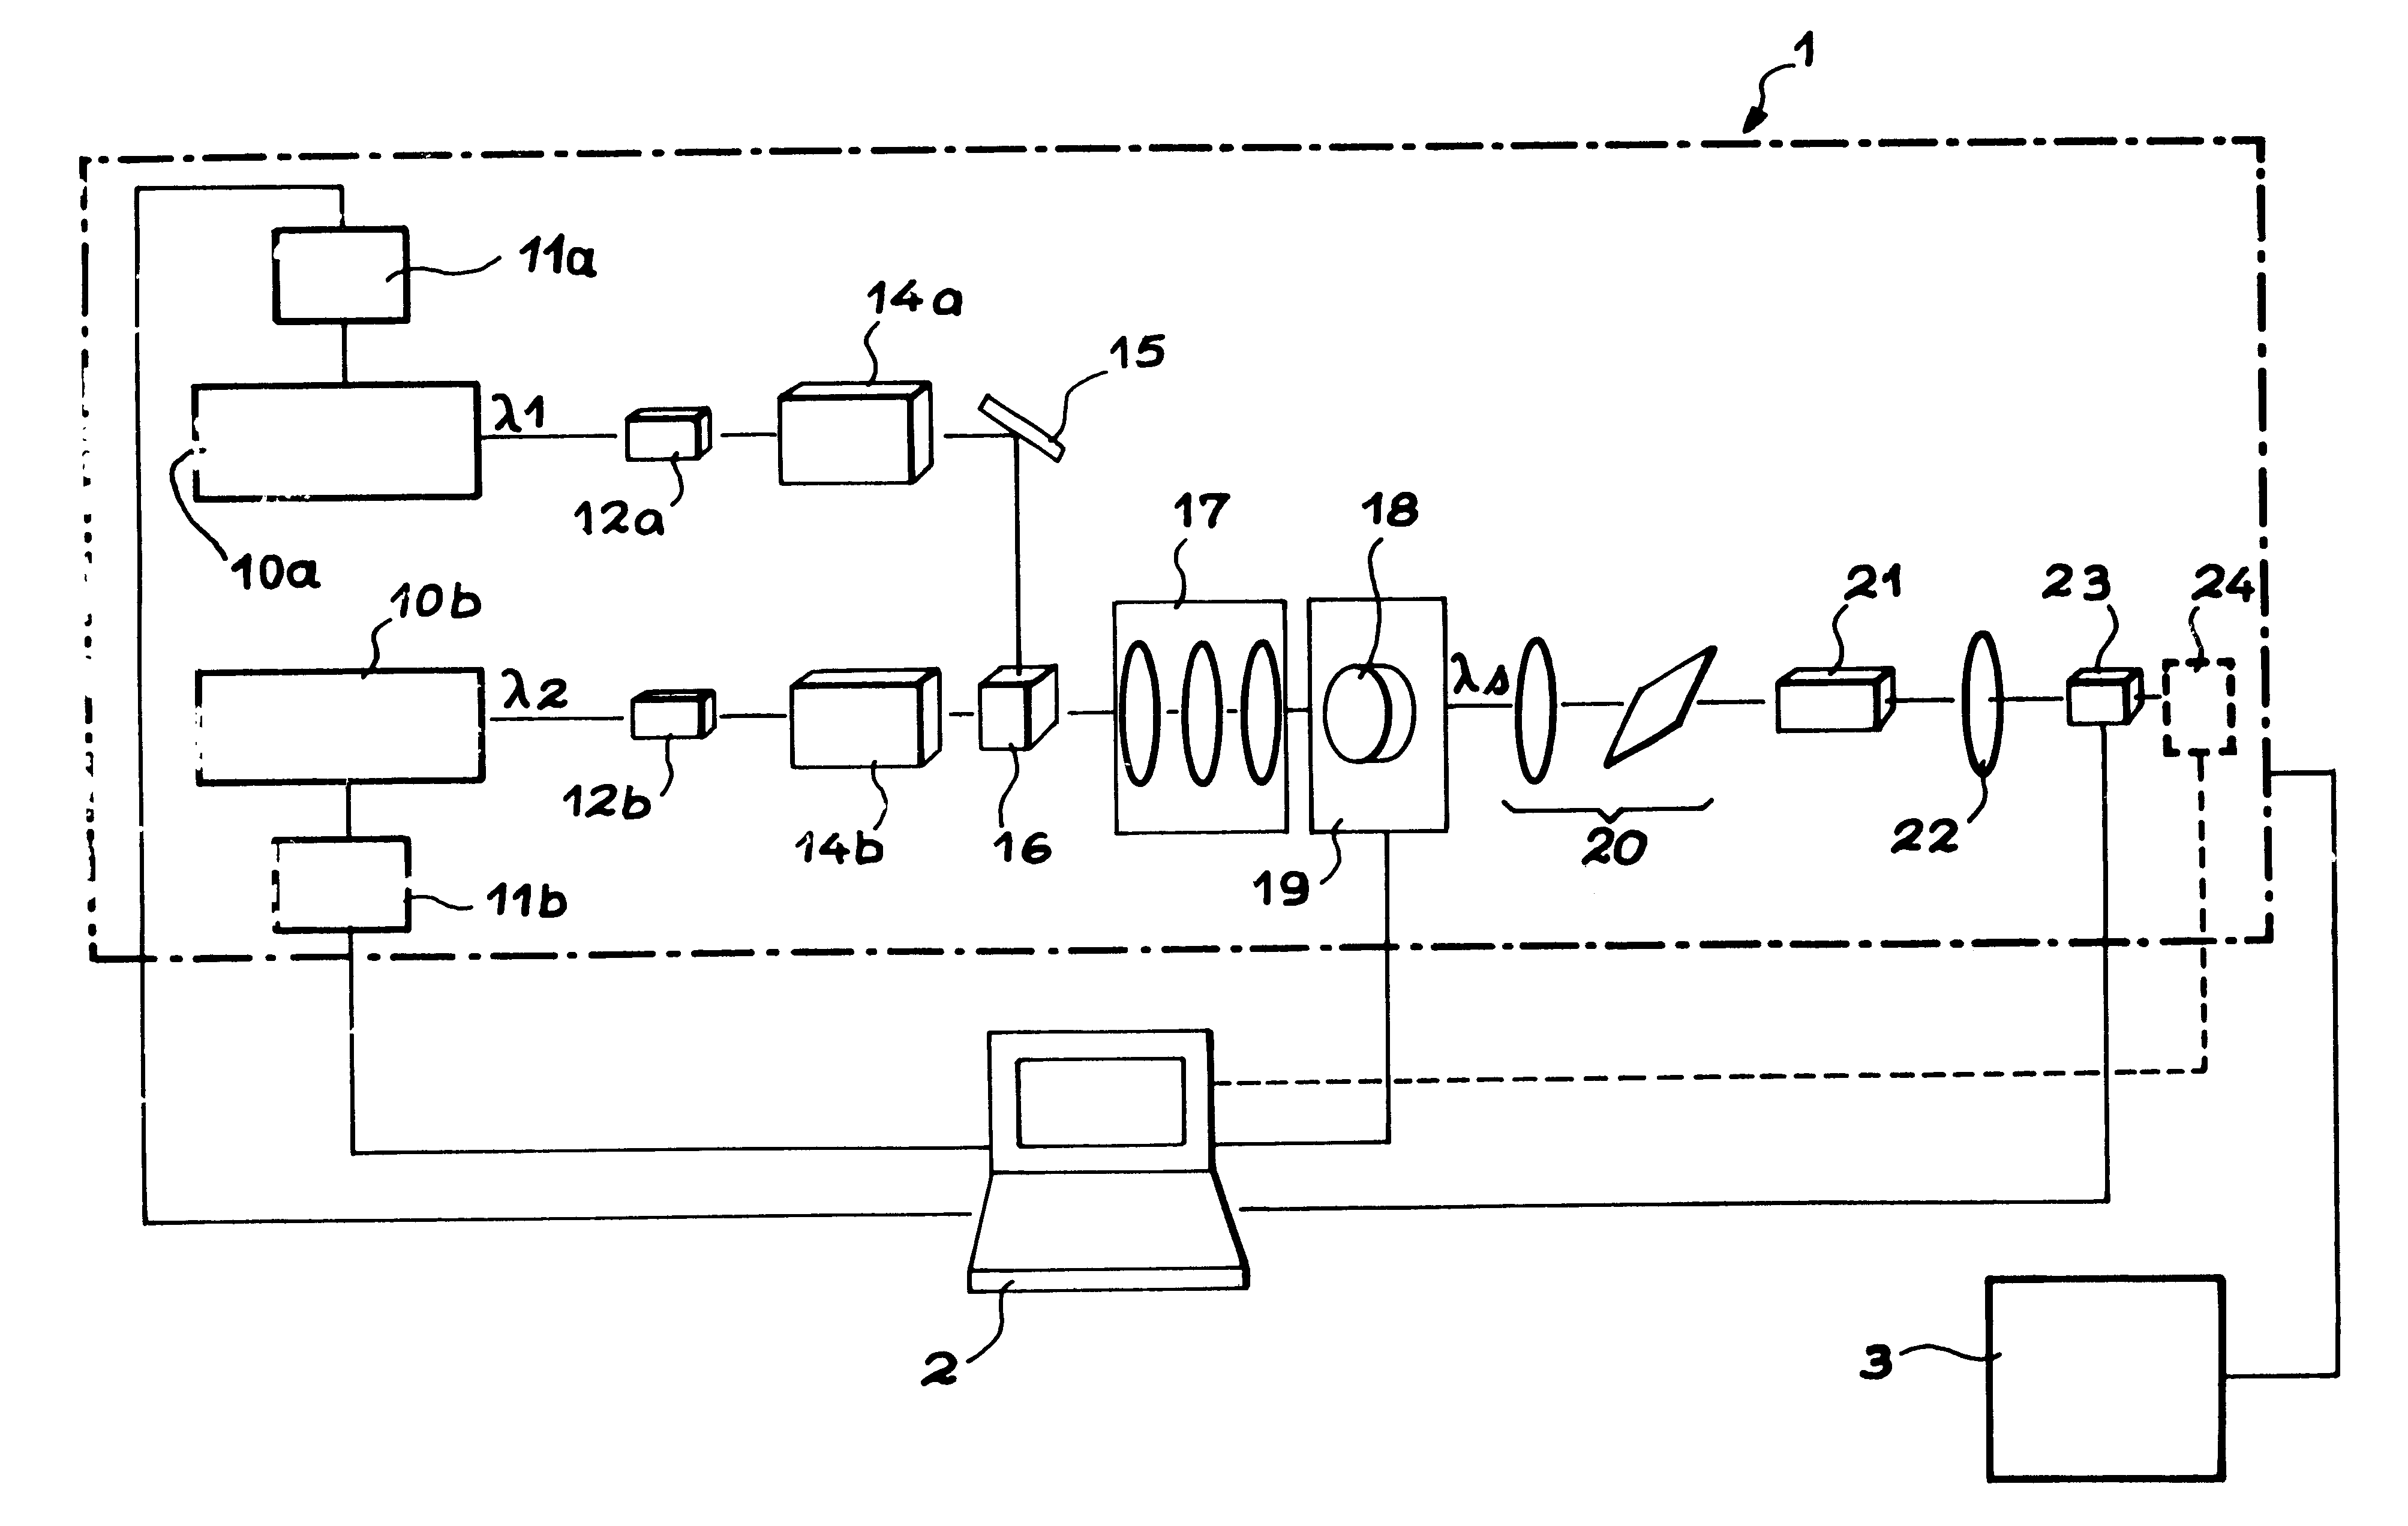 System for detection and measurement of one or several gases in a gas mix